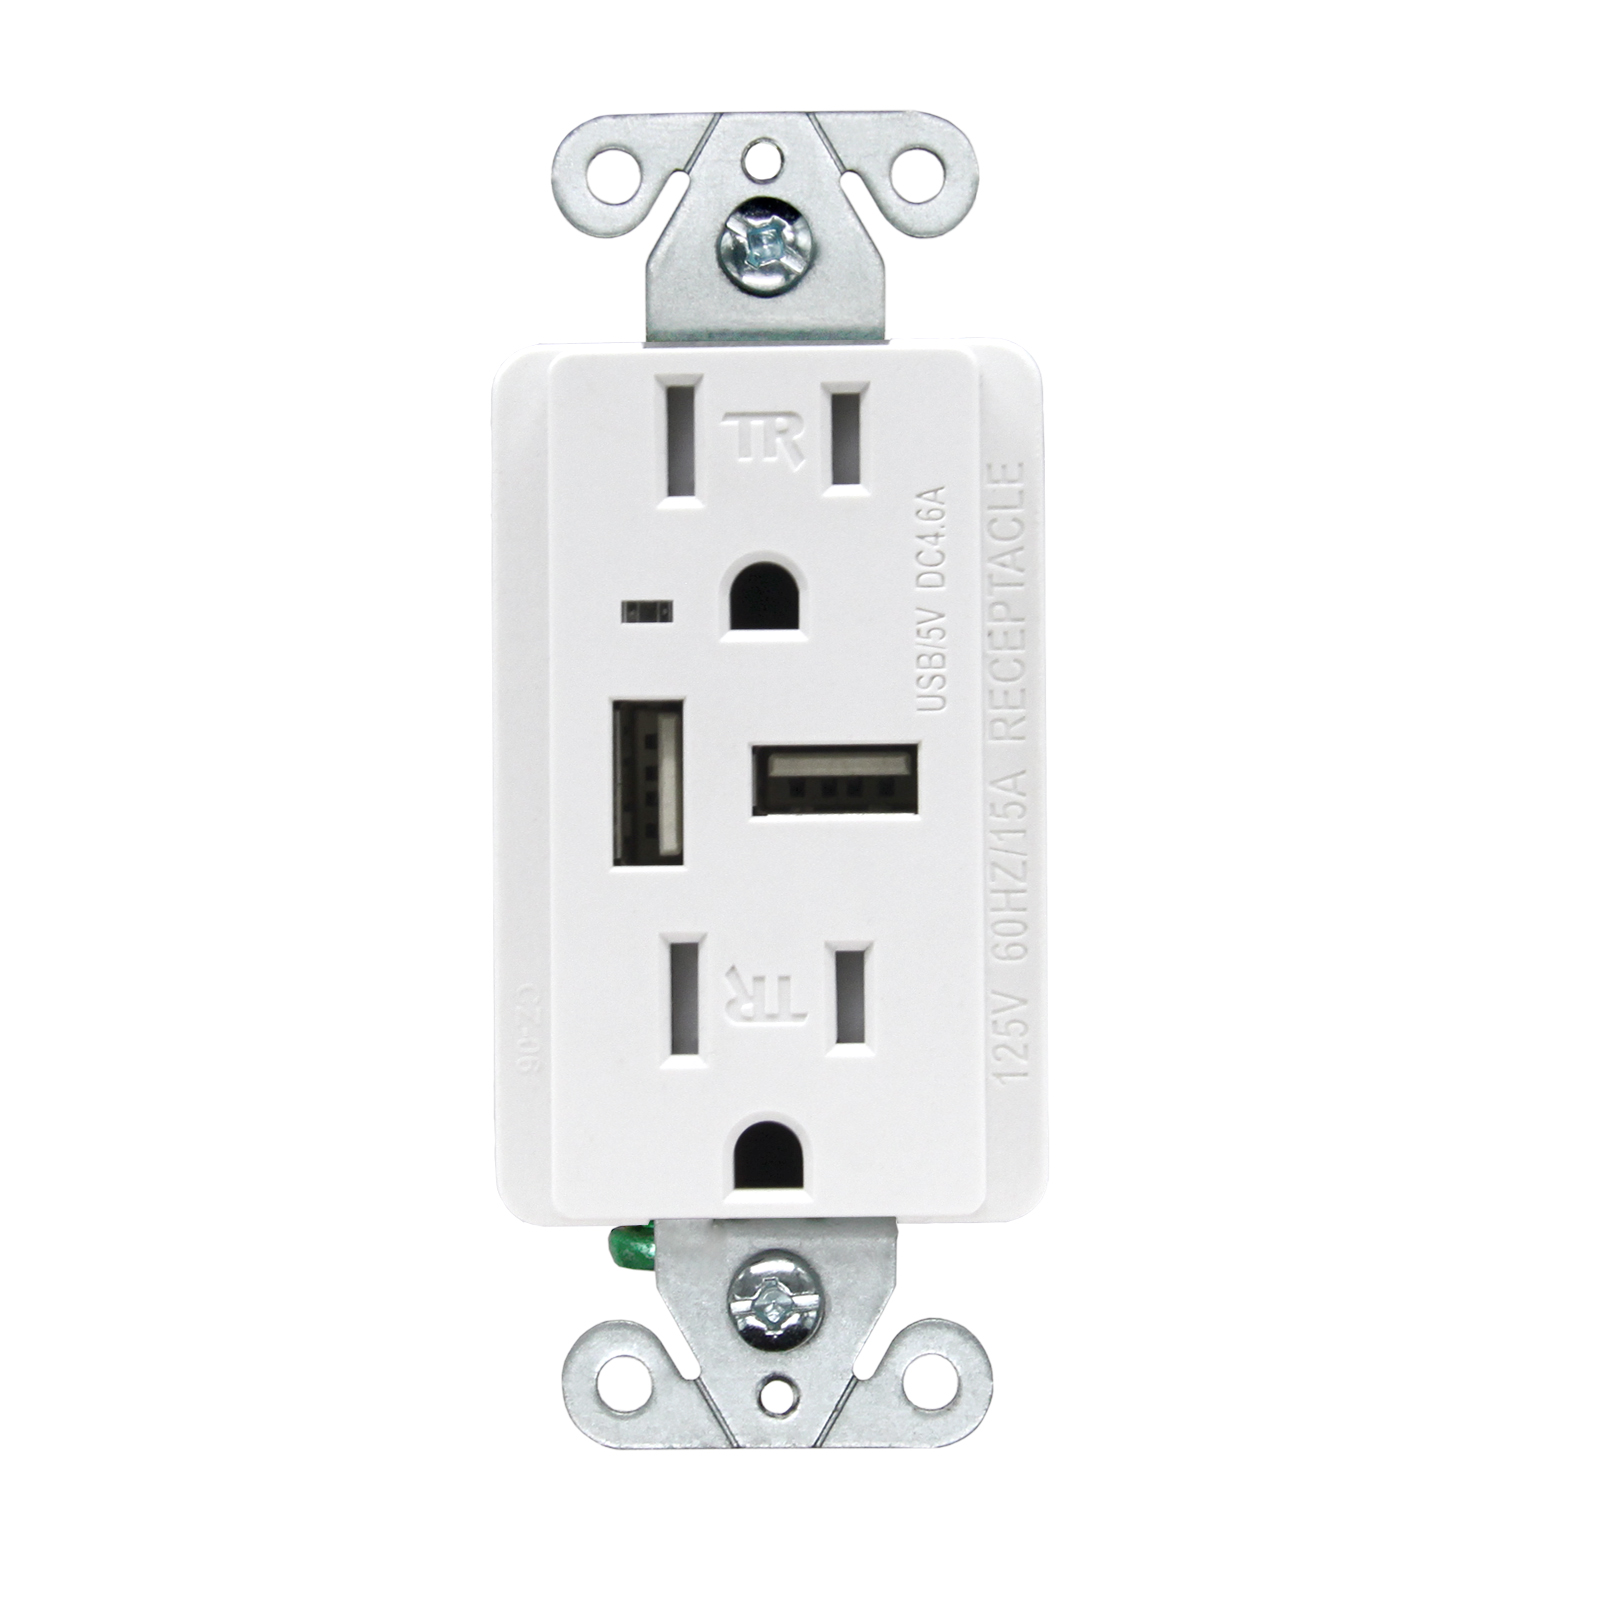 Faith USB Wall Outlets CZ-06 4.6 Amp Dual USB Charger, 15 Amp Duplex Tamper Resistant Outlet Featured Image